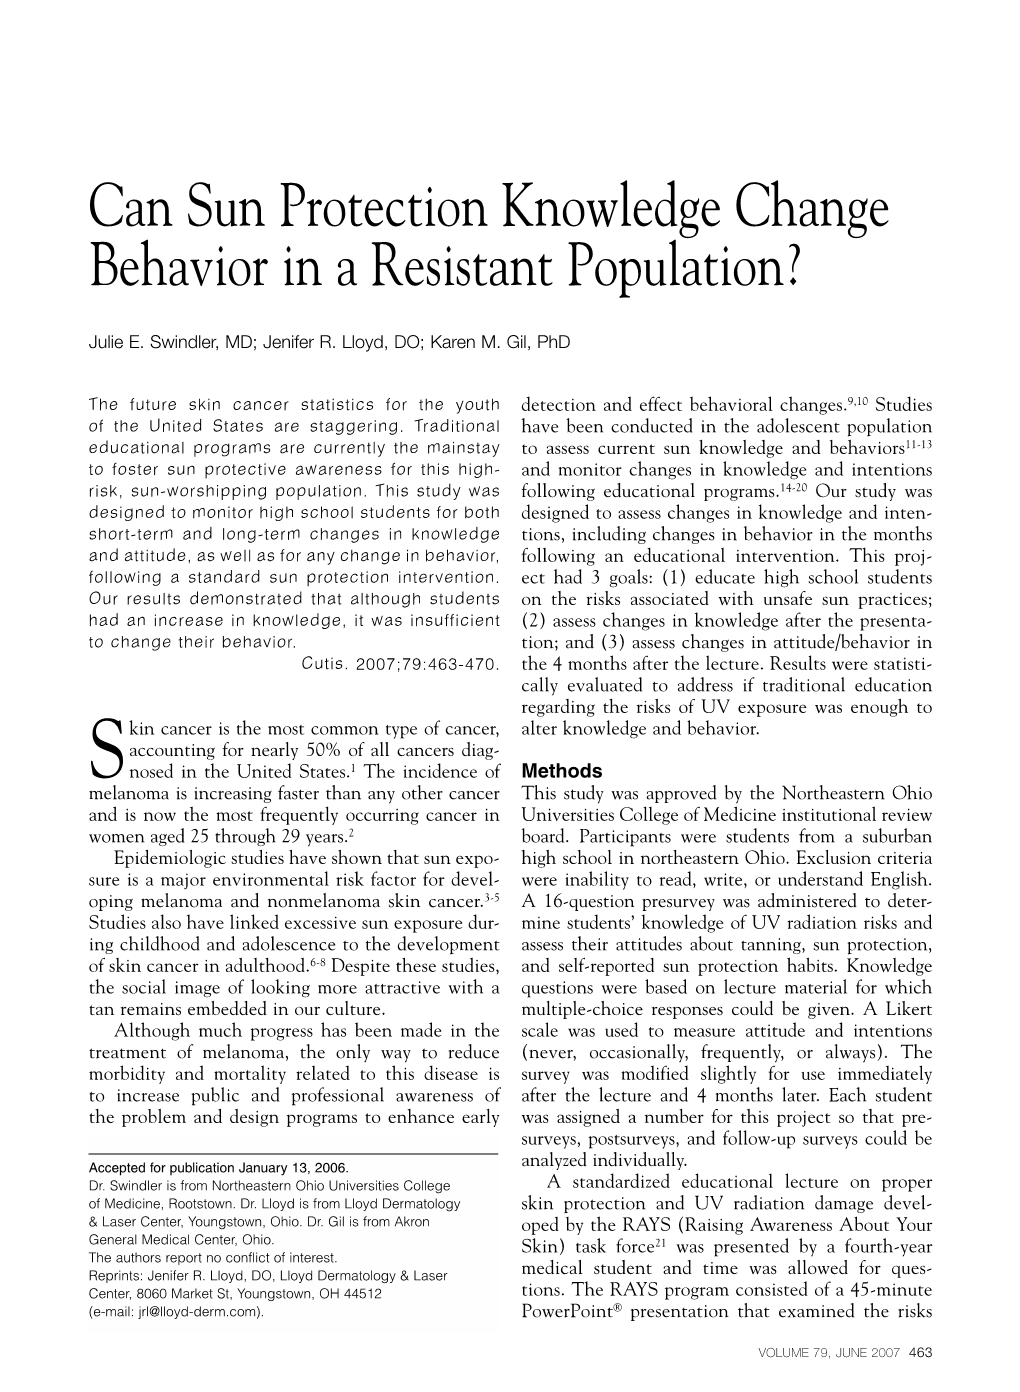 Can Sun Protection Knowledge Change Behavior in a Resistant Population?